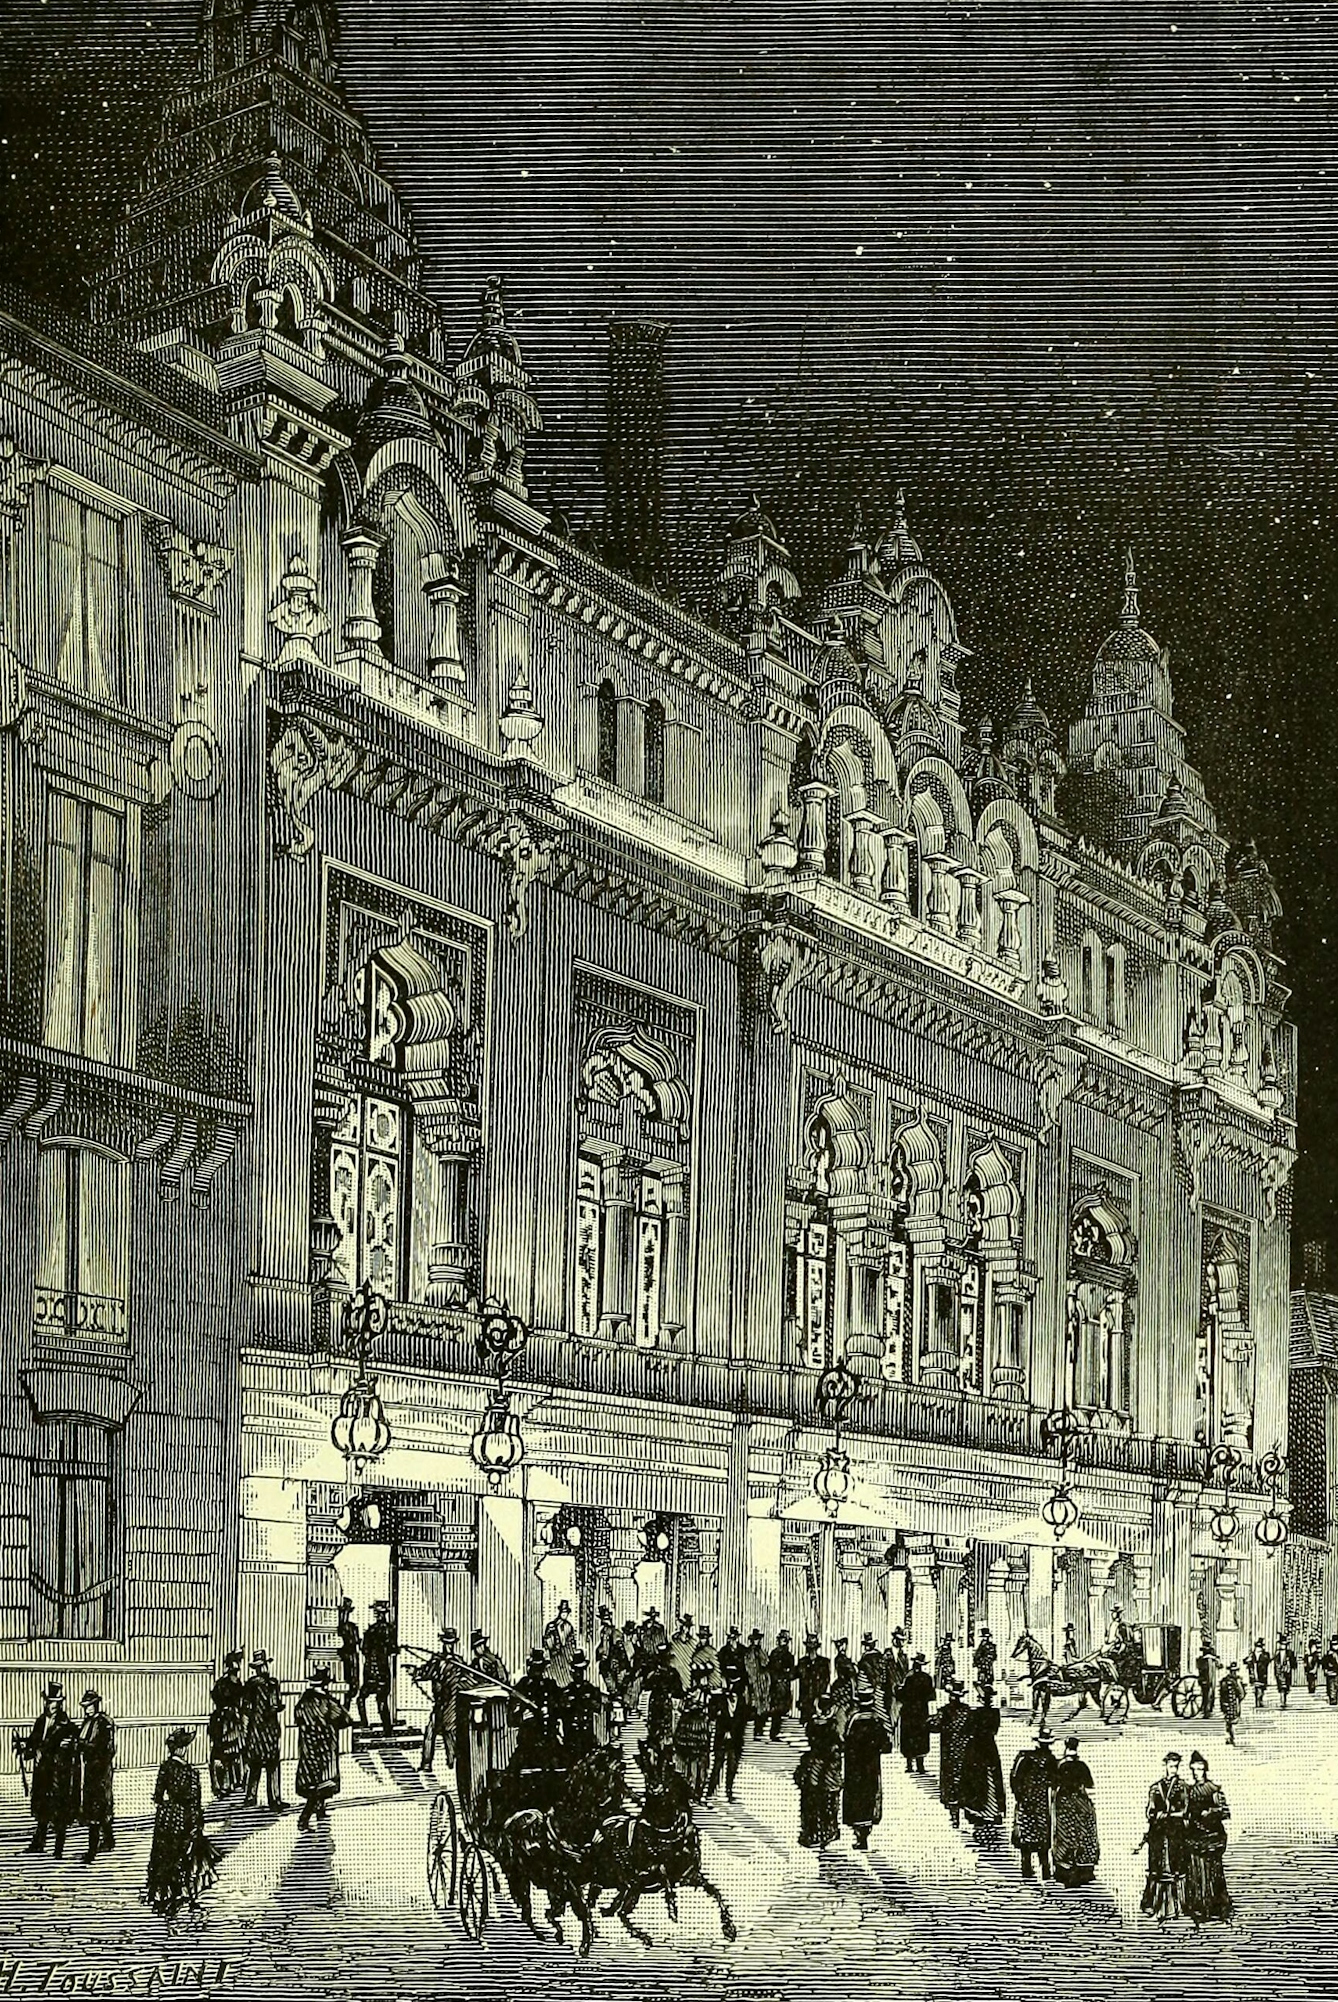 The electric illuminations of the Éden-Théâtre in Paris were focused on its spectacular façade, which was inspired by Indian architecture.